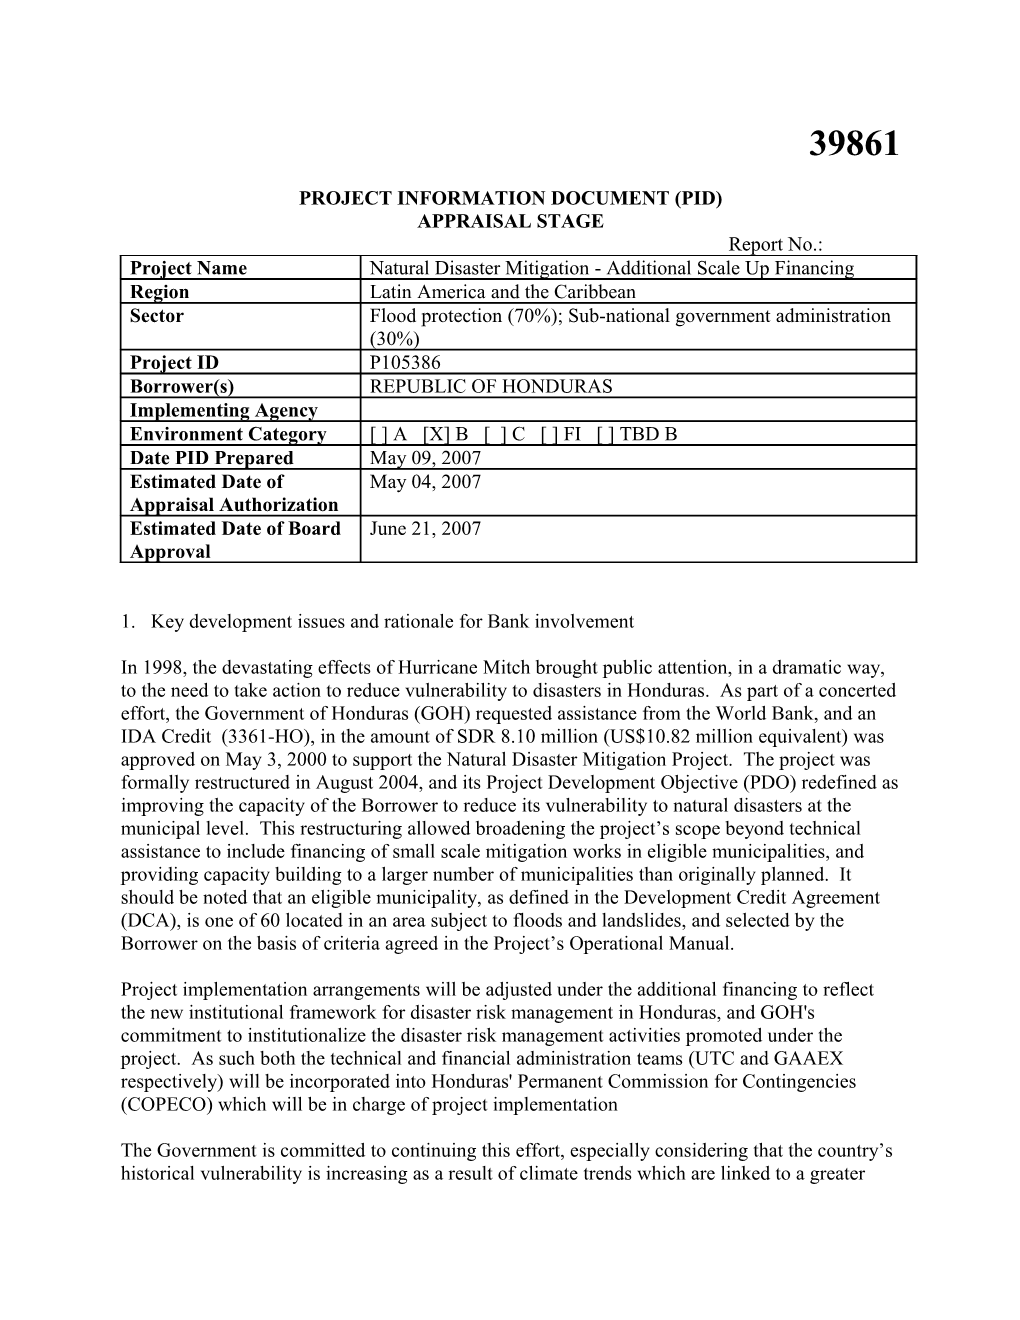 Project Information Document (Pid) s63